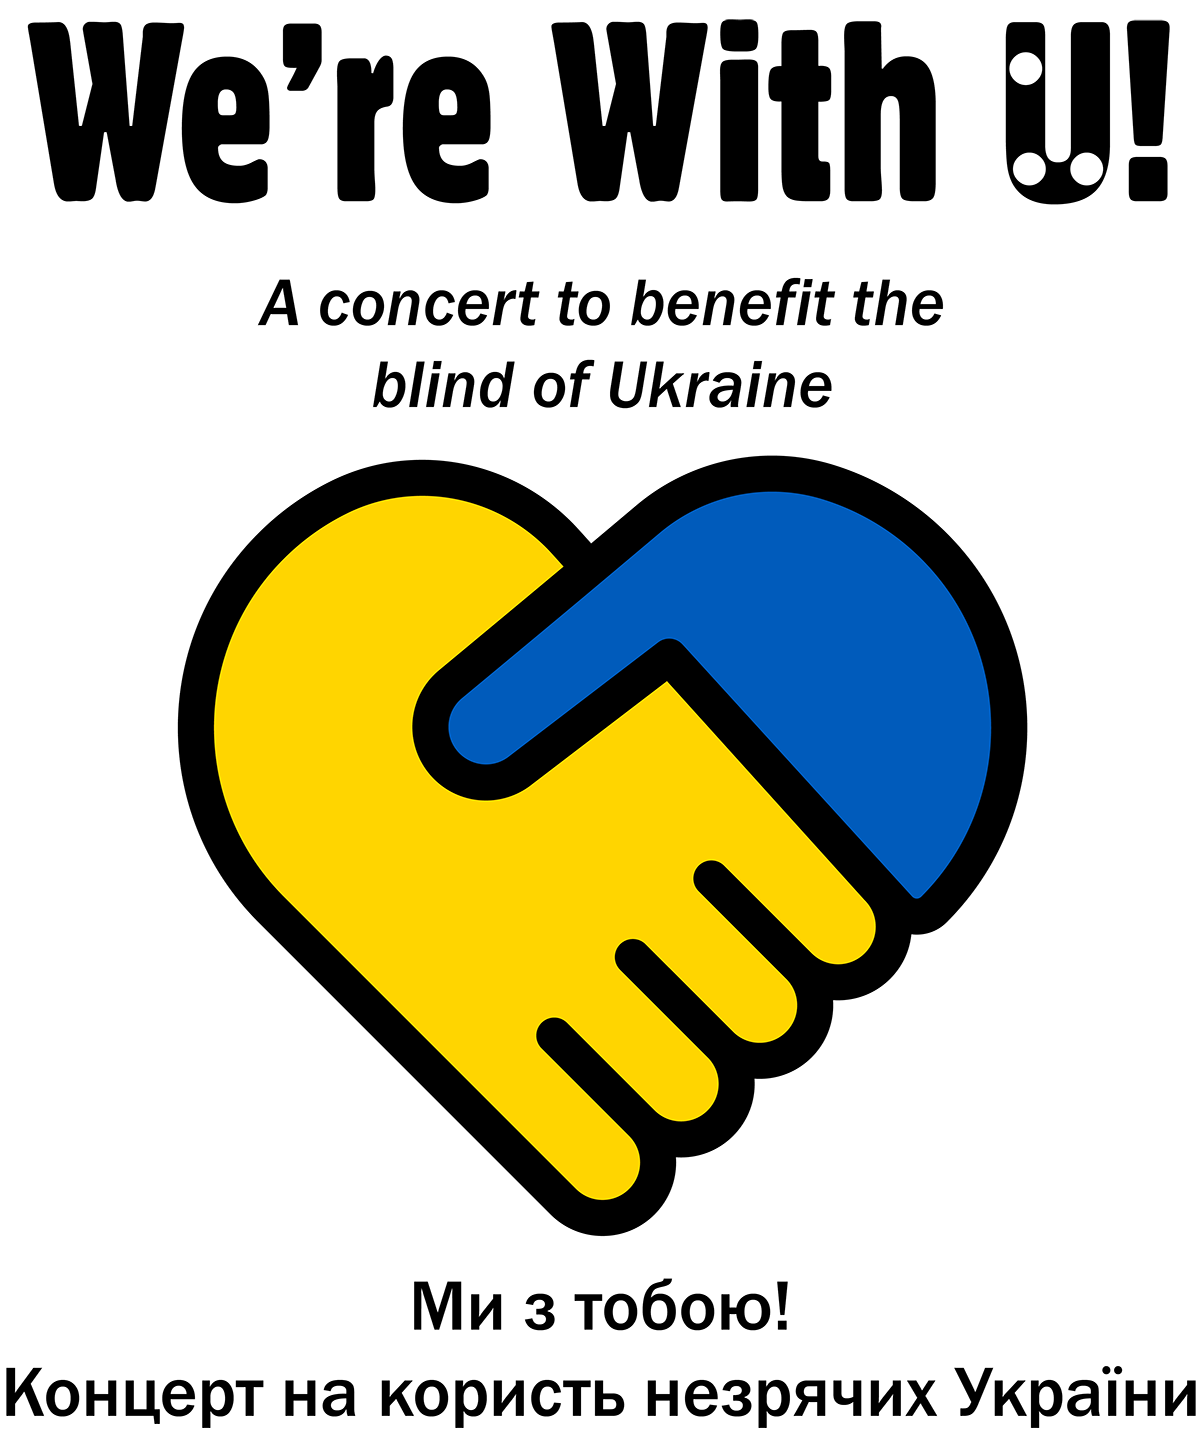 In the center, two hands, one yellow and one blue (the colors of the Ukrainian flag) are gripped together to form a heart icon, big and bolded text above the heart says We're With U! The Braille letter U is embedded in the print U. Text under the title reads a concert to benefit the blind of Ukraine. Below the heart is Ukraine translation of the text.